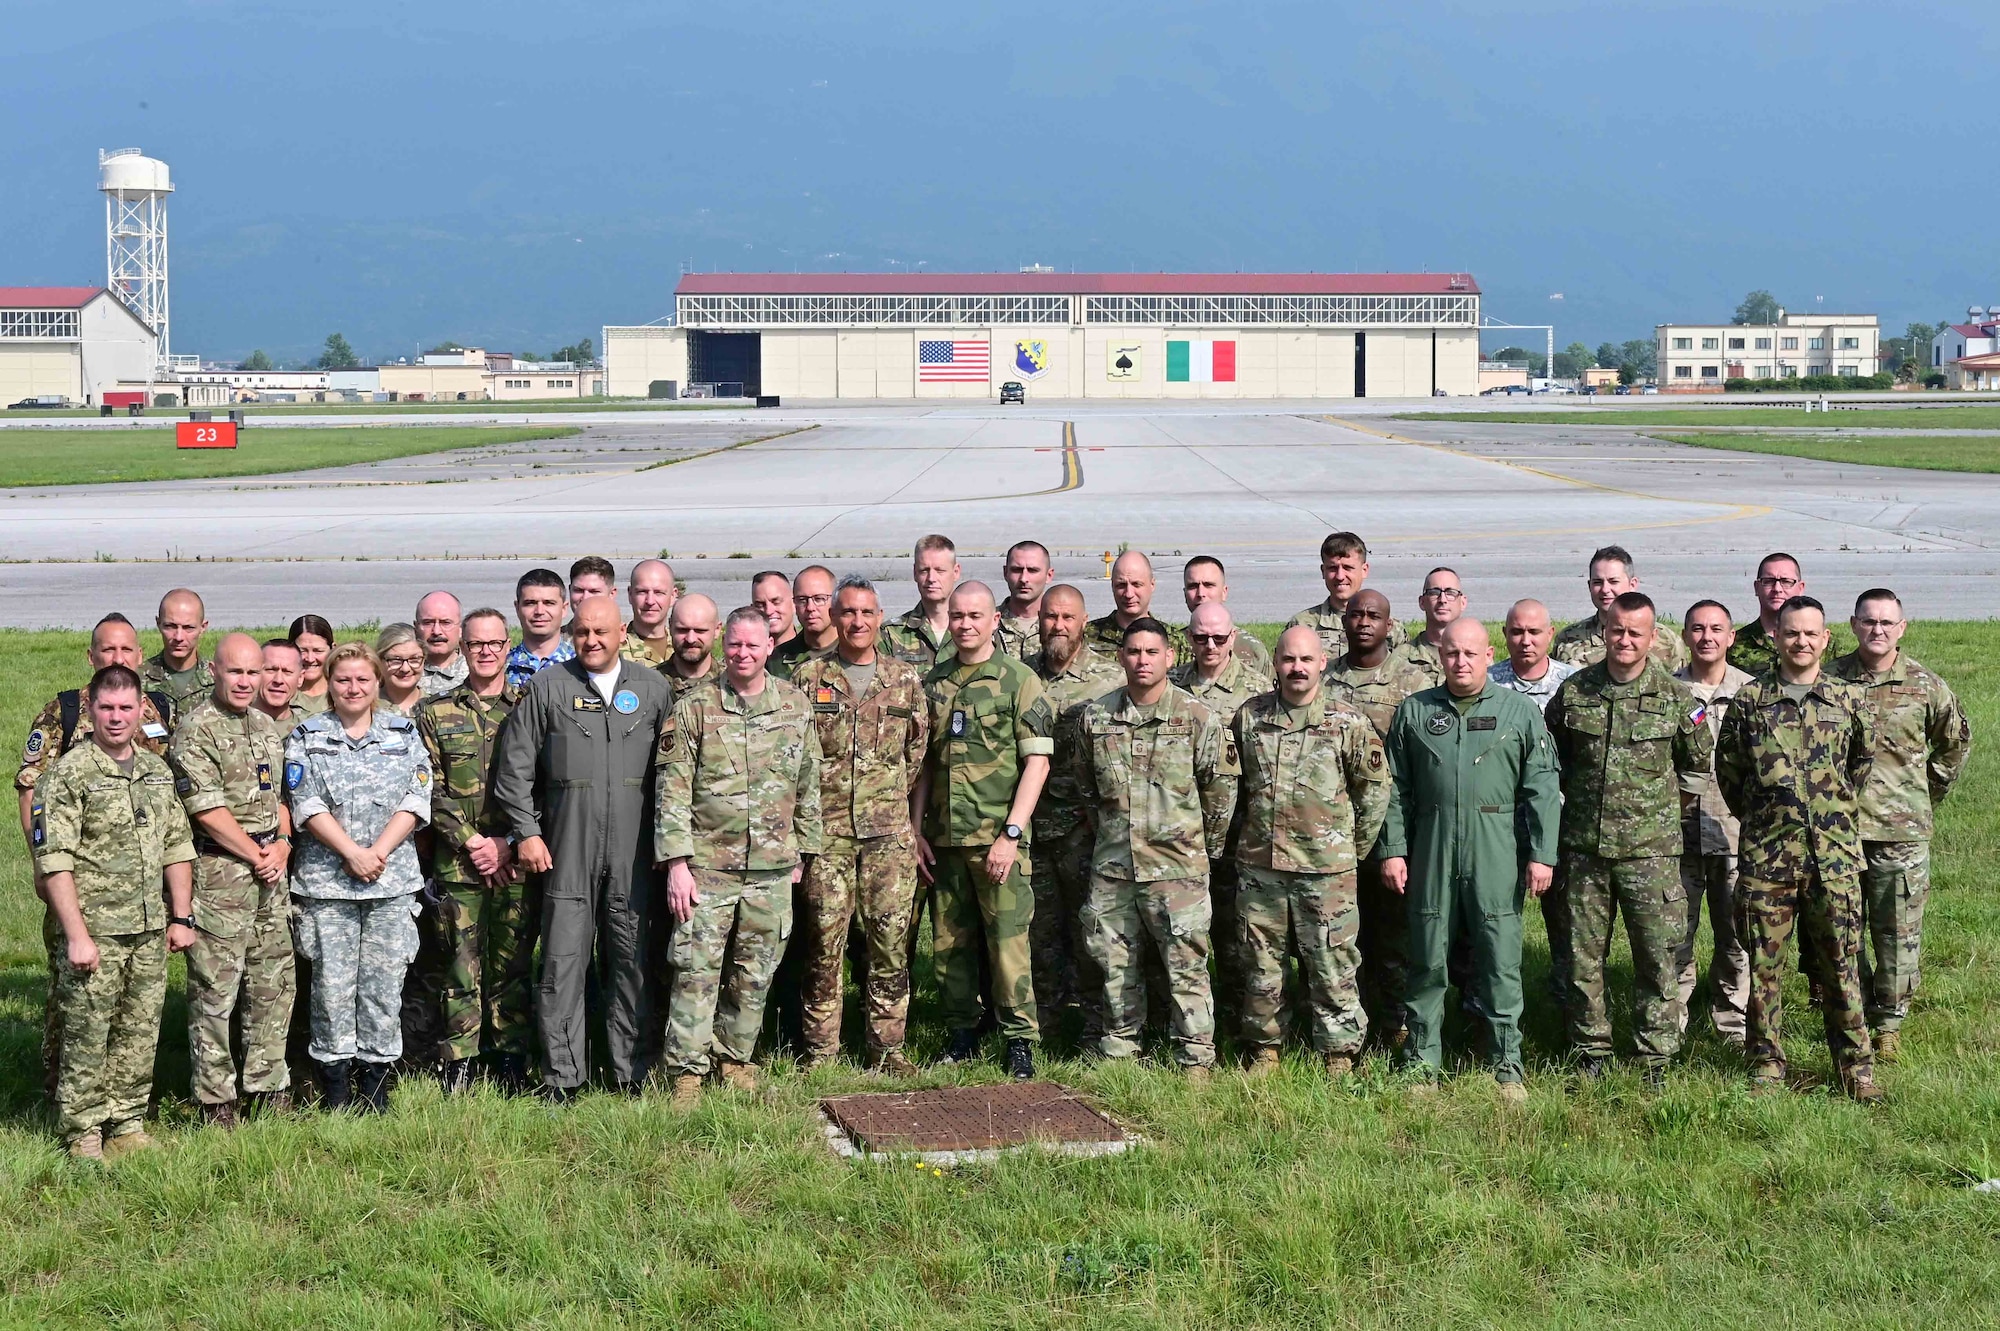 A group of chiefs pose for a photo in front of a hangar